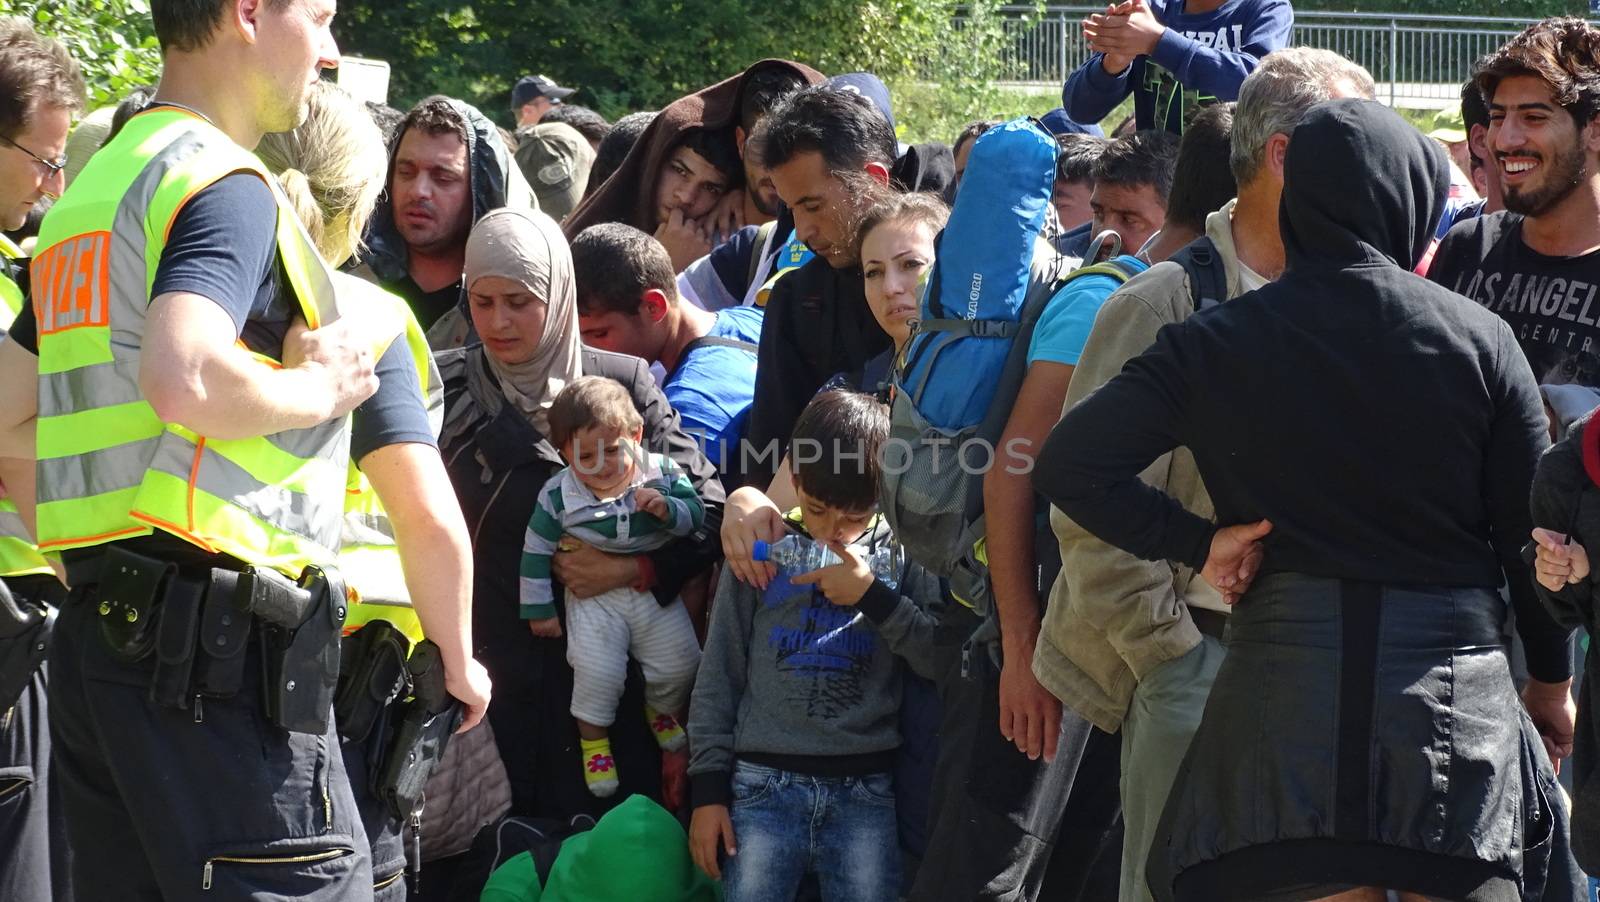 GERMANY, Freilassing: Refugees wait at the gates of Freilassing, Bavaria, on the German side of the Germany-Austria border, September 16, 2015.